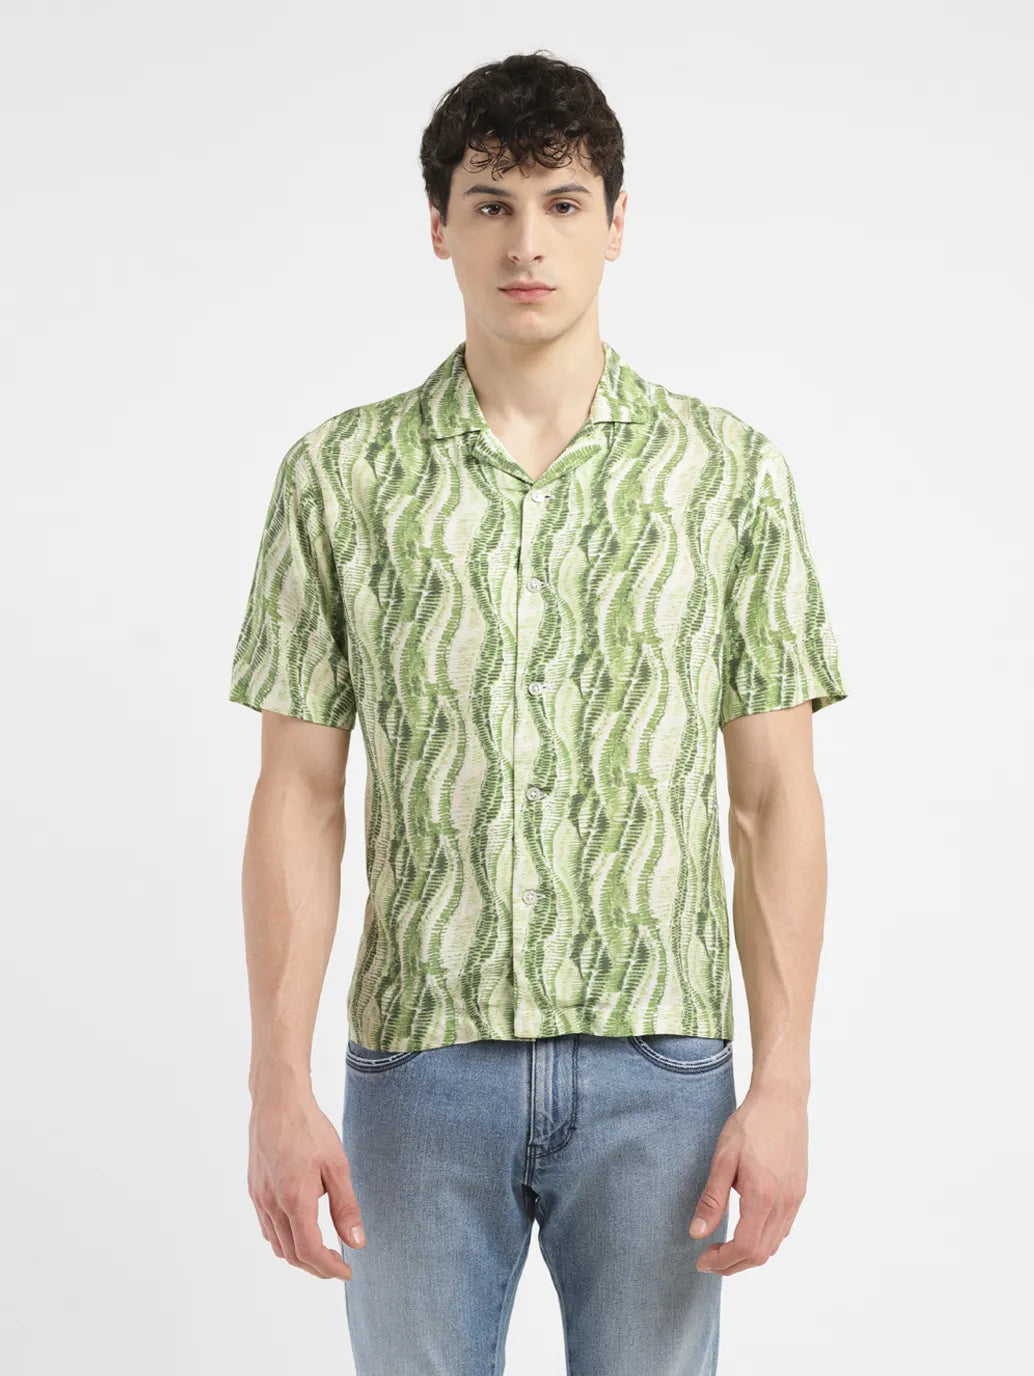 Men's All Over Printed Relaxed Fit Shirt